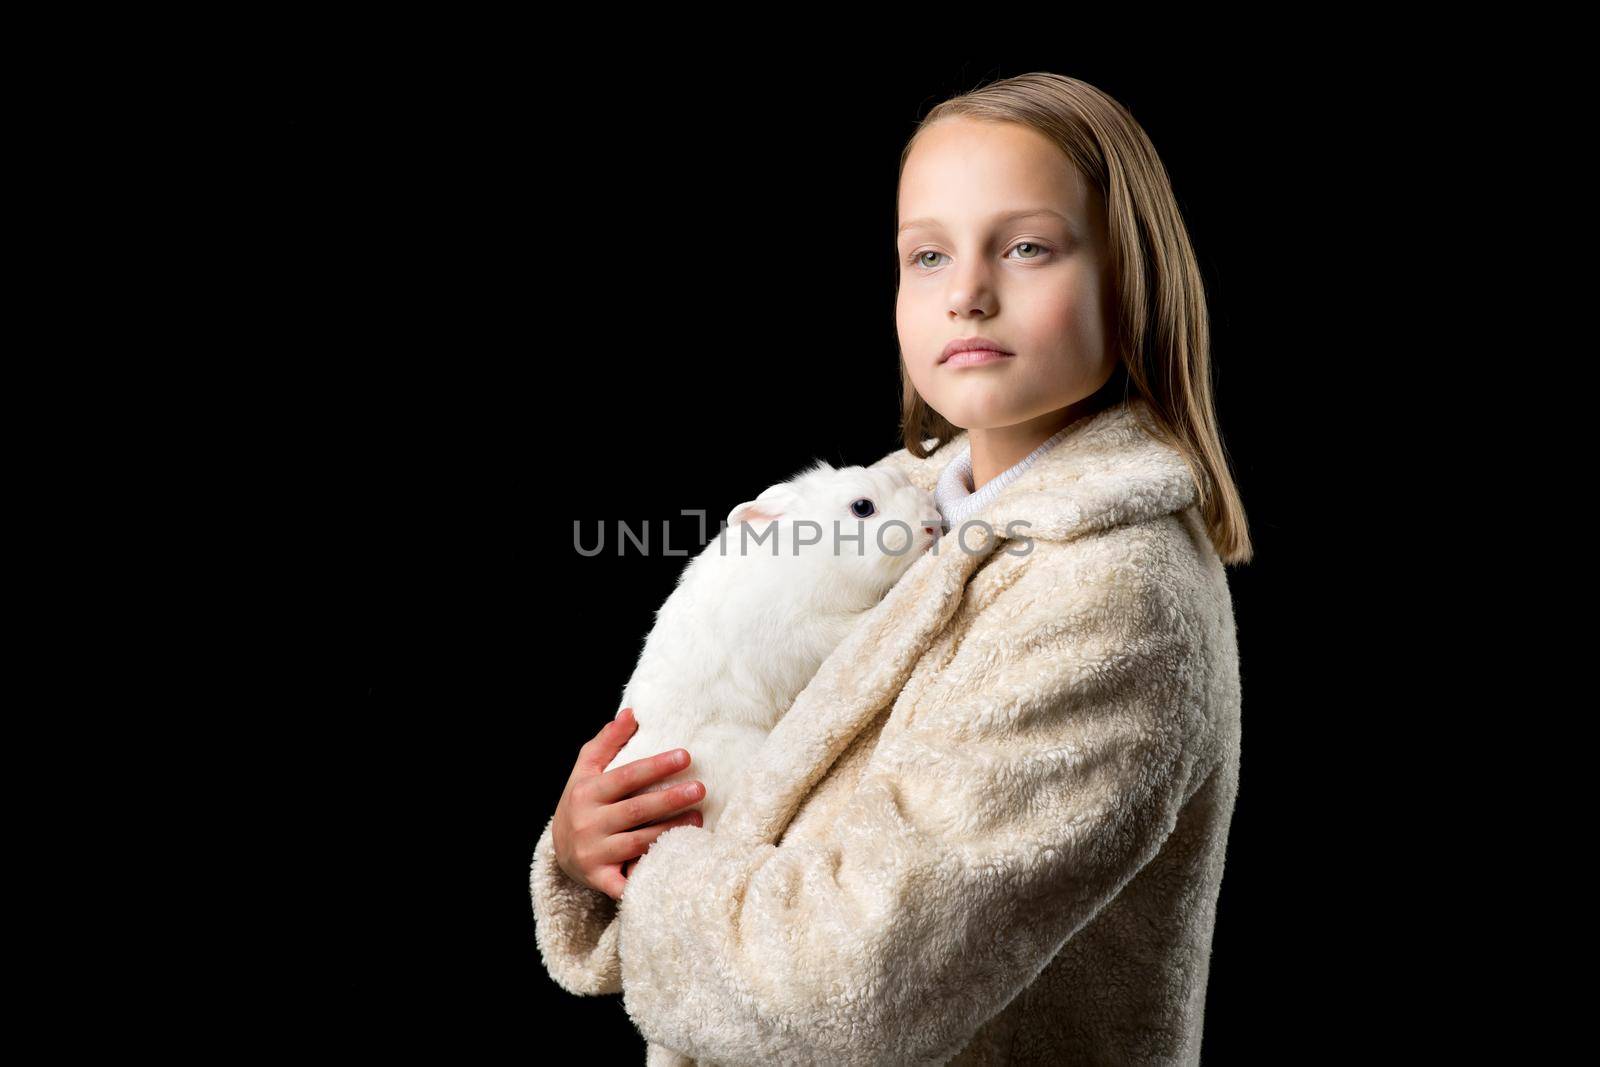 Pretty girl hugging white rabbit. Stylish beautiful girl in beige fur coat holding cute bunny. Portrait of preteen child posing with pet animal in studio against black background